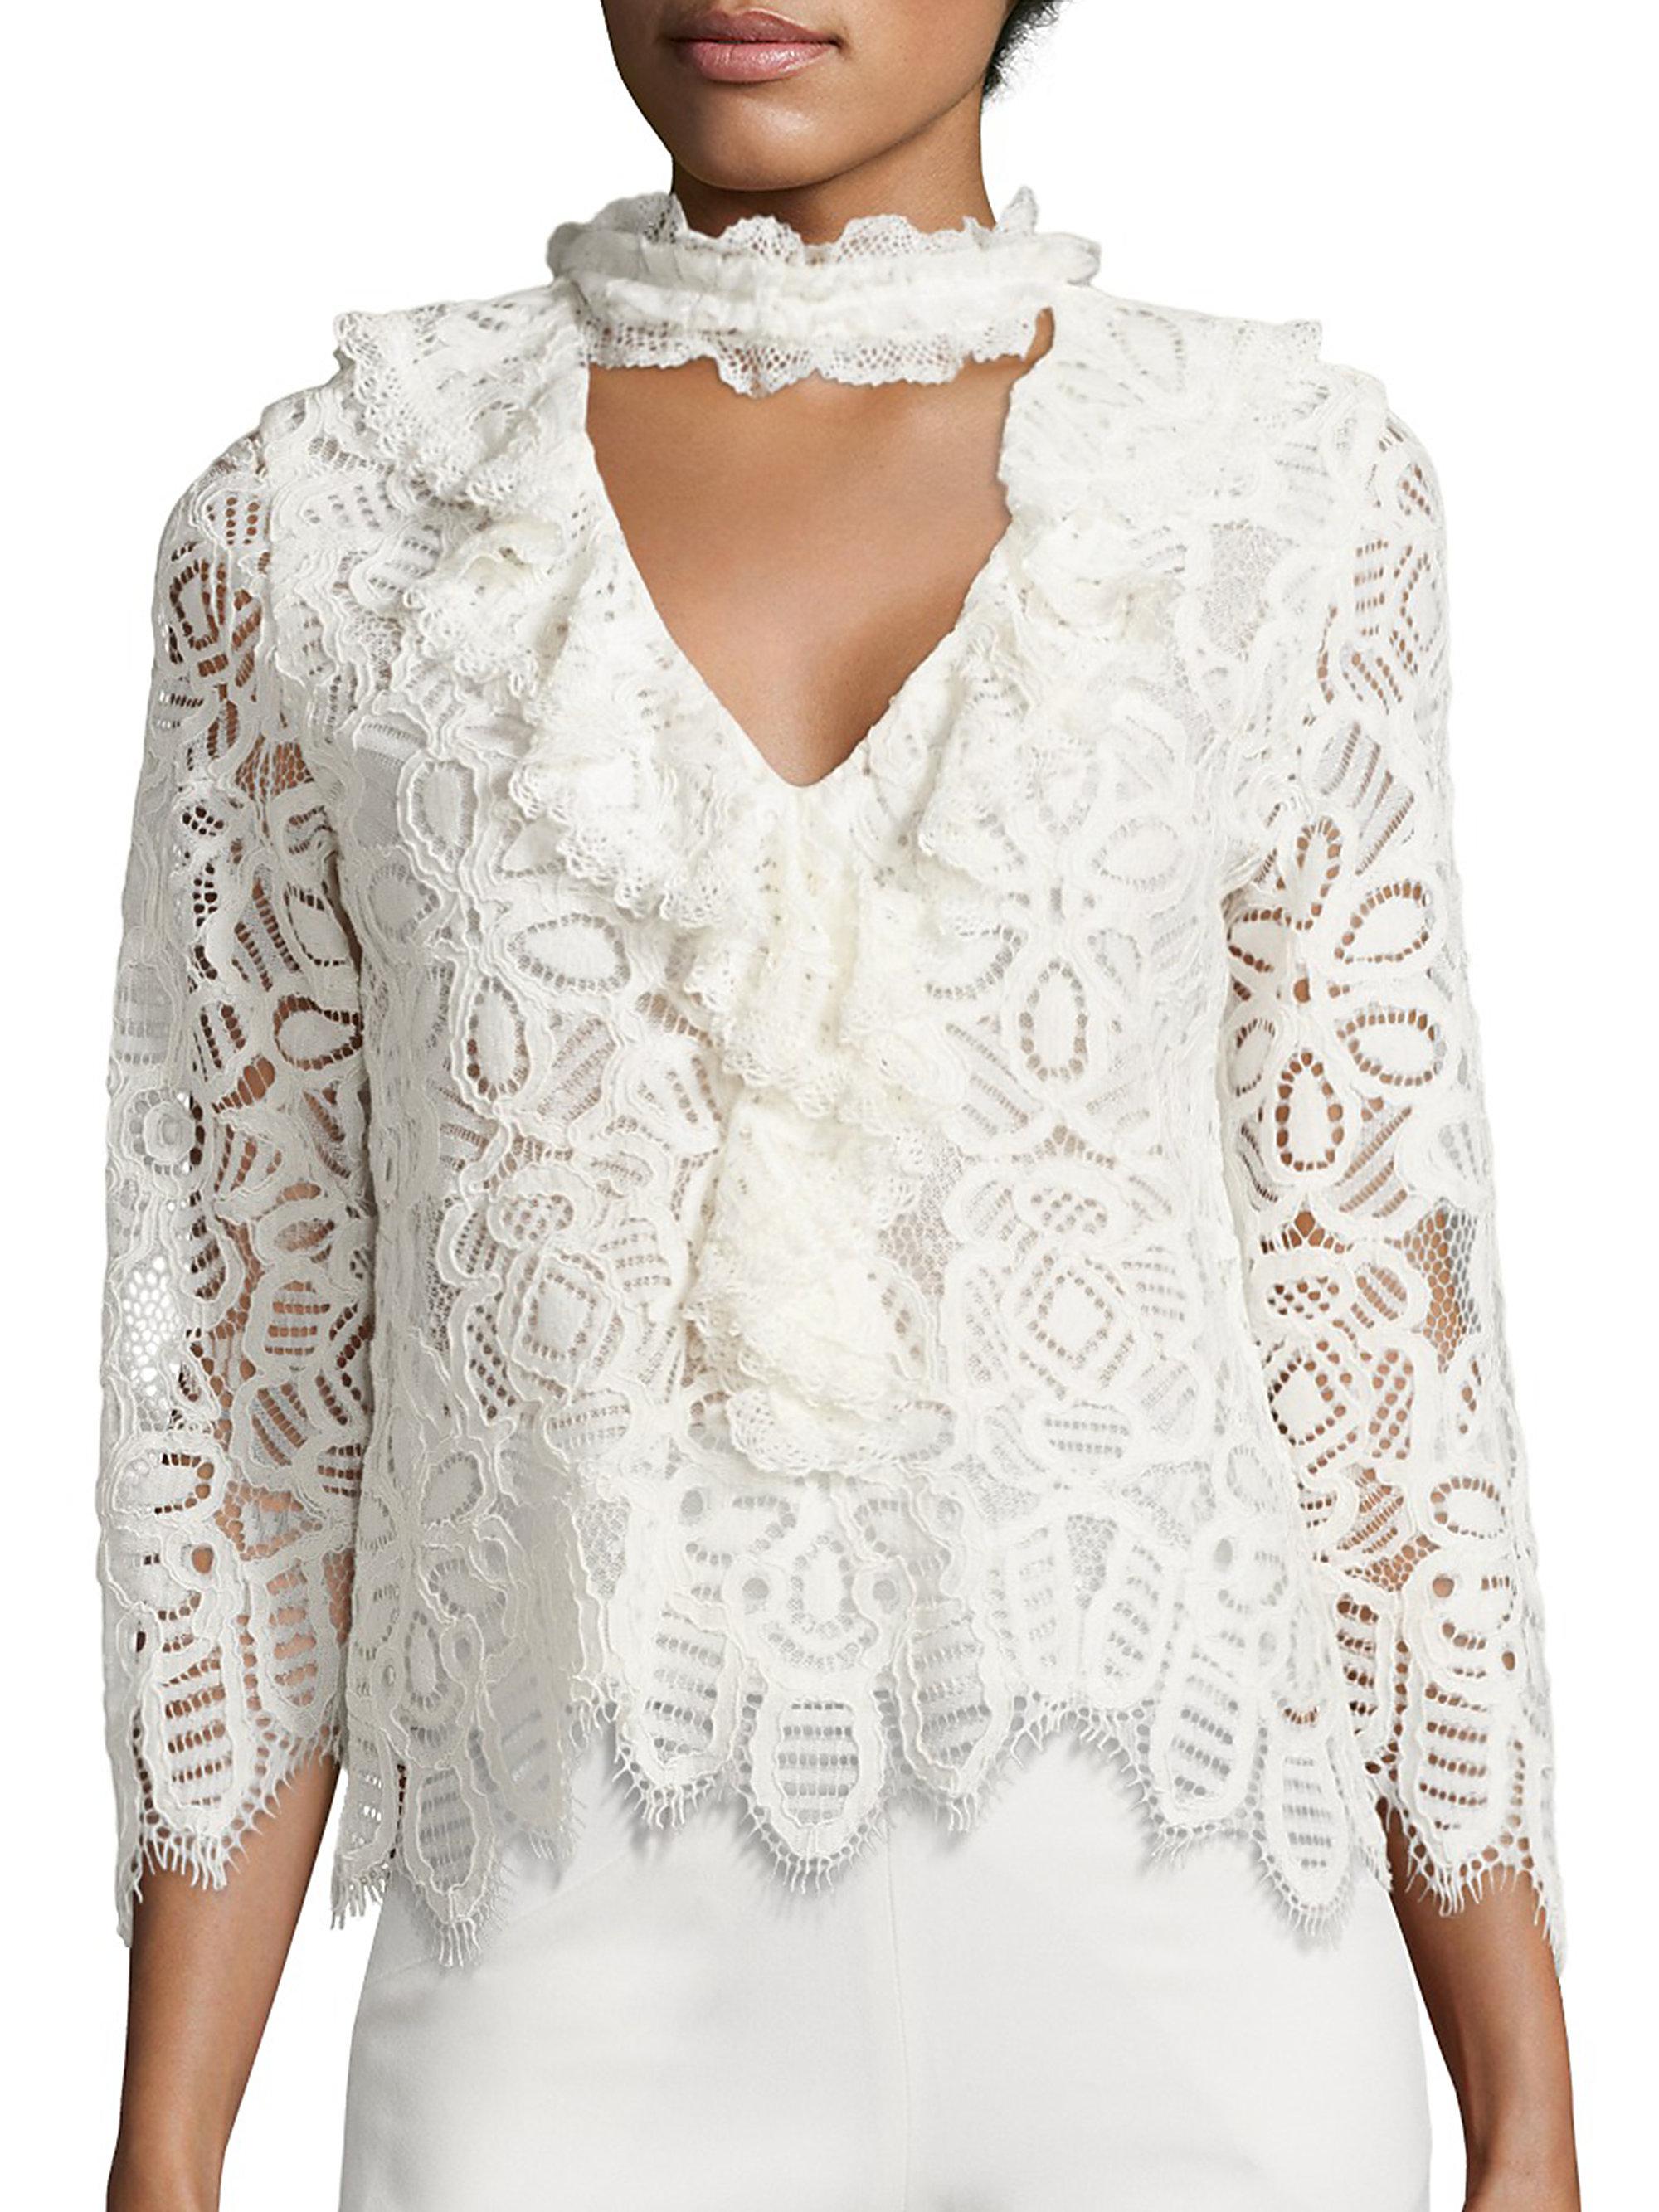 Lyst - Alexis Waverly Lace Choker Top in White